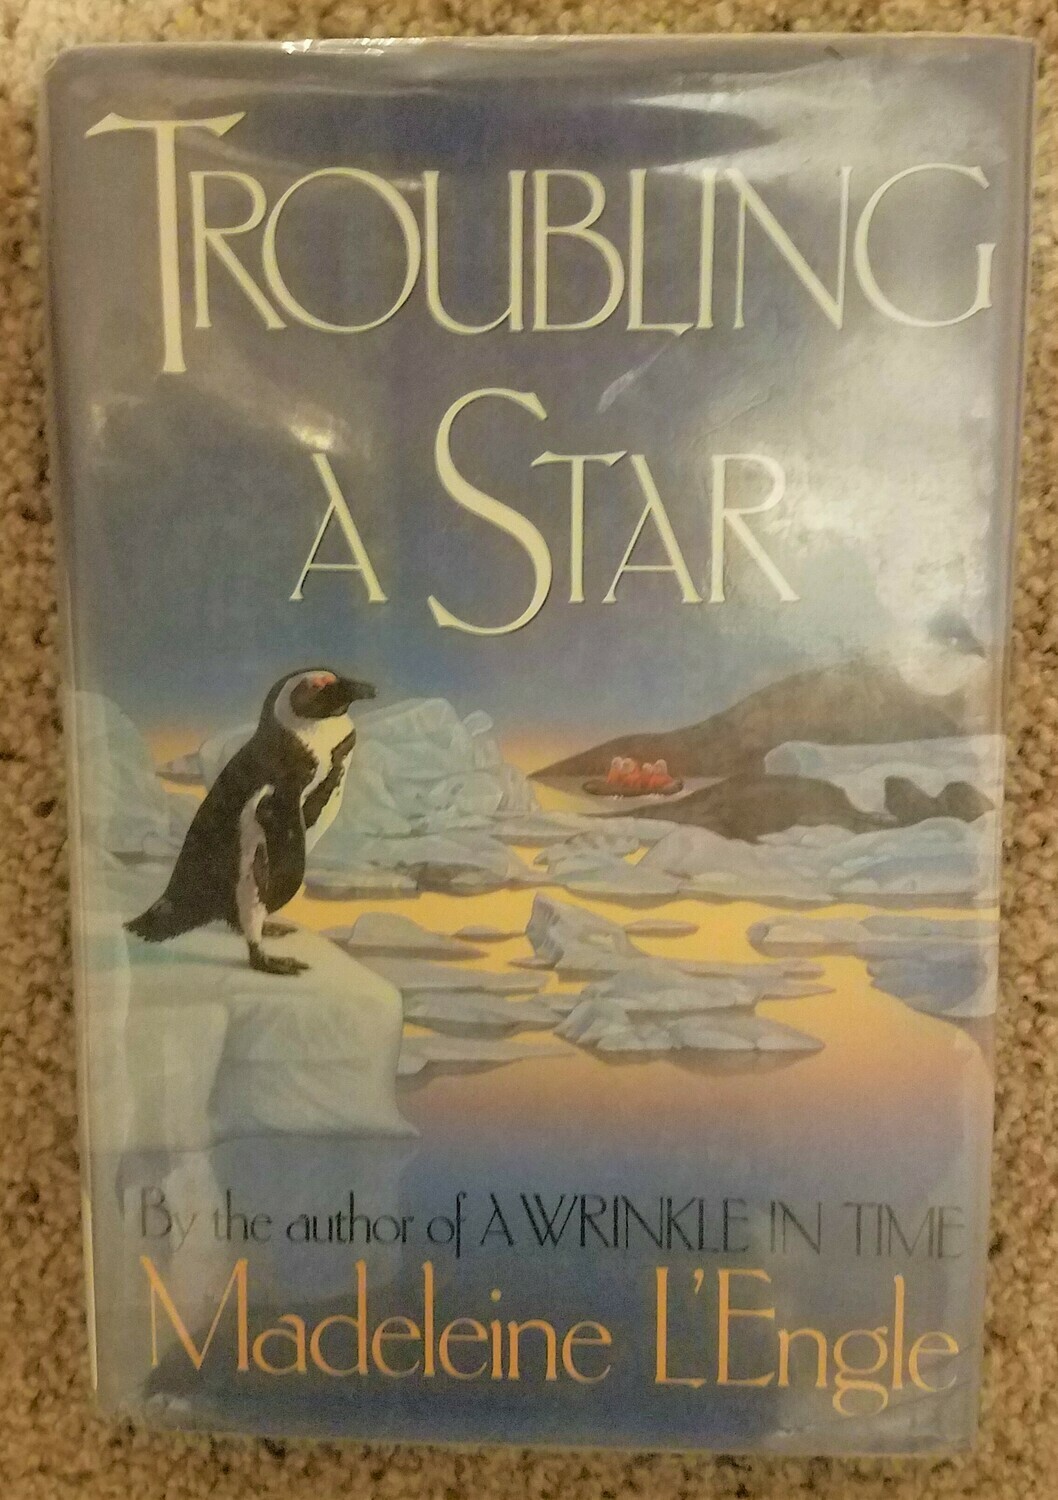 Troubling A Star by Madeleine L'Engle